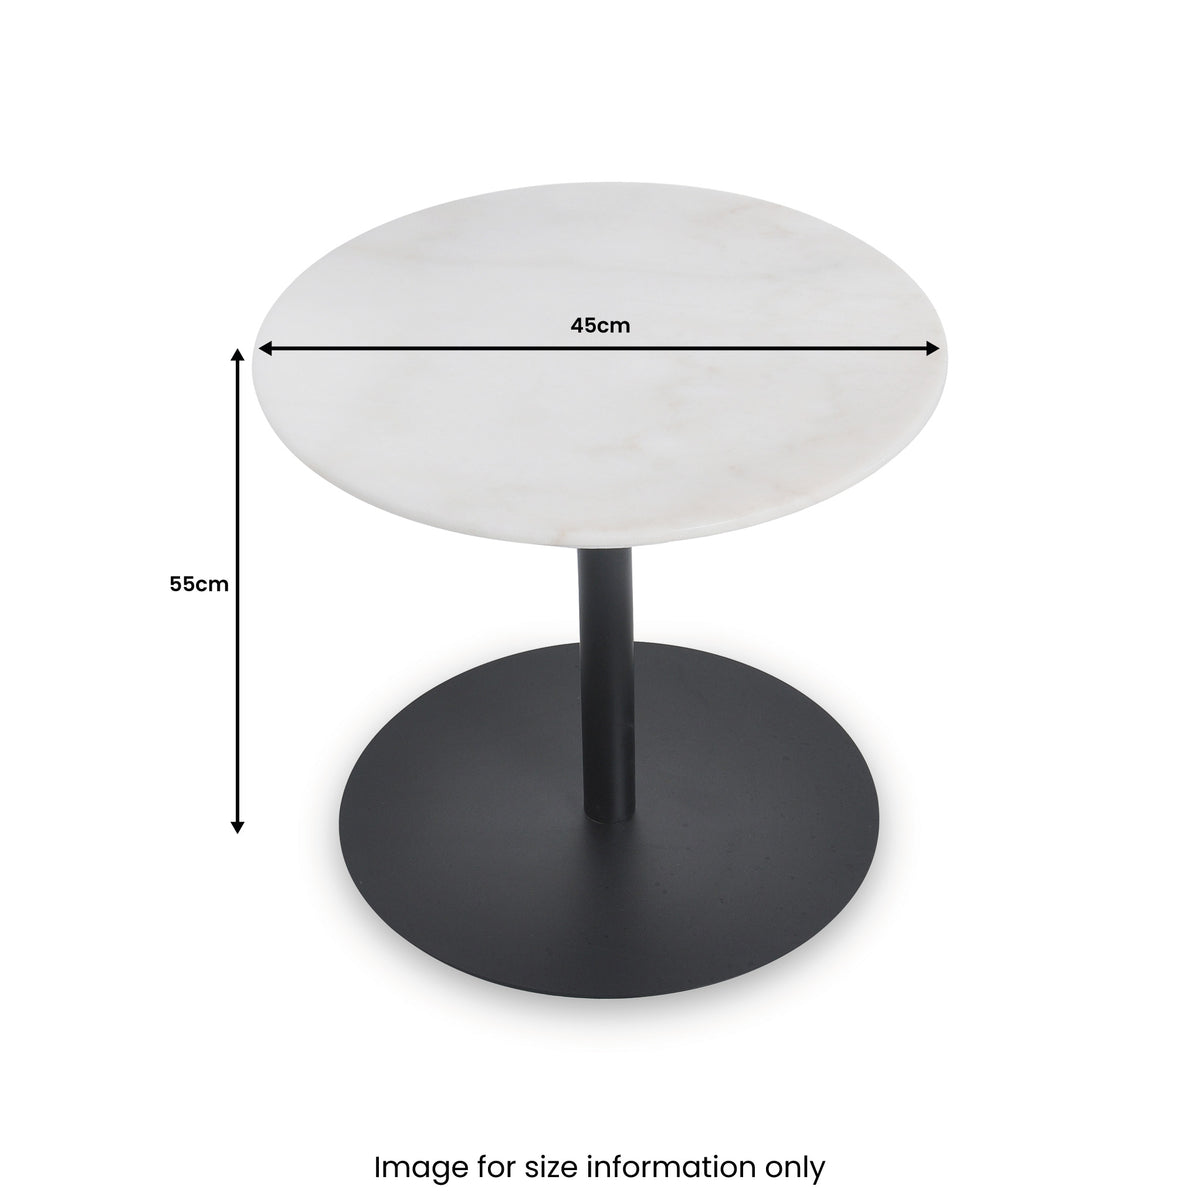 Cairns Marble Top Lamp Table dimensions